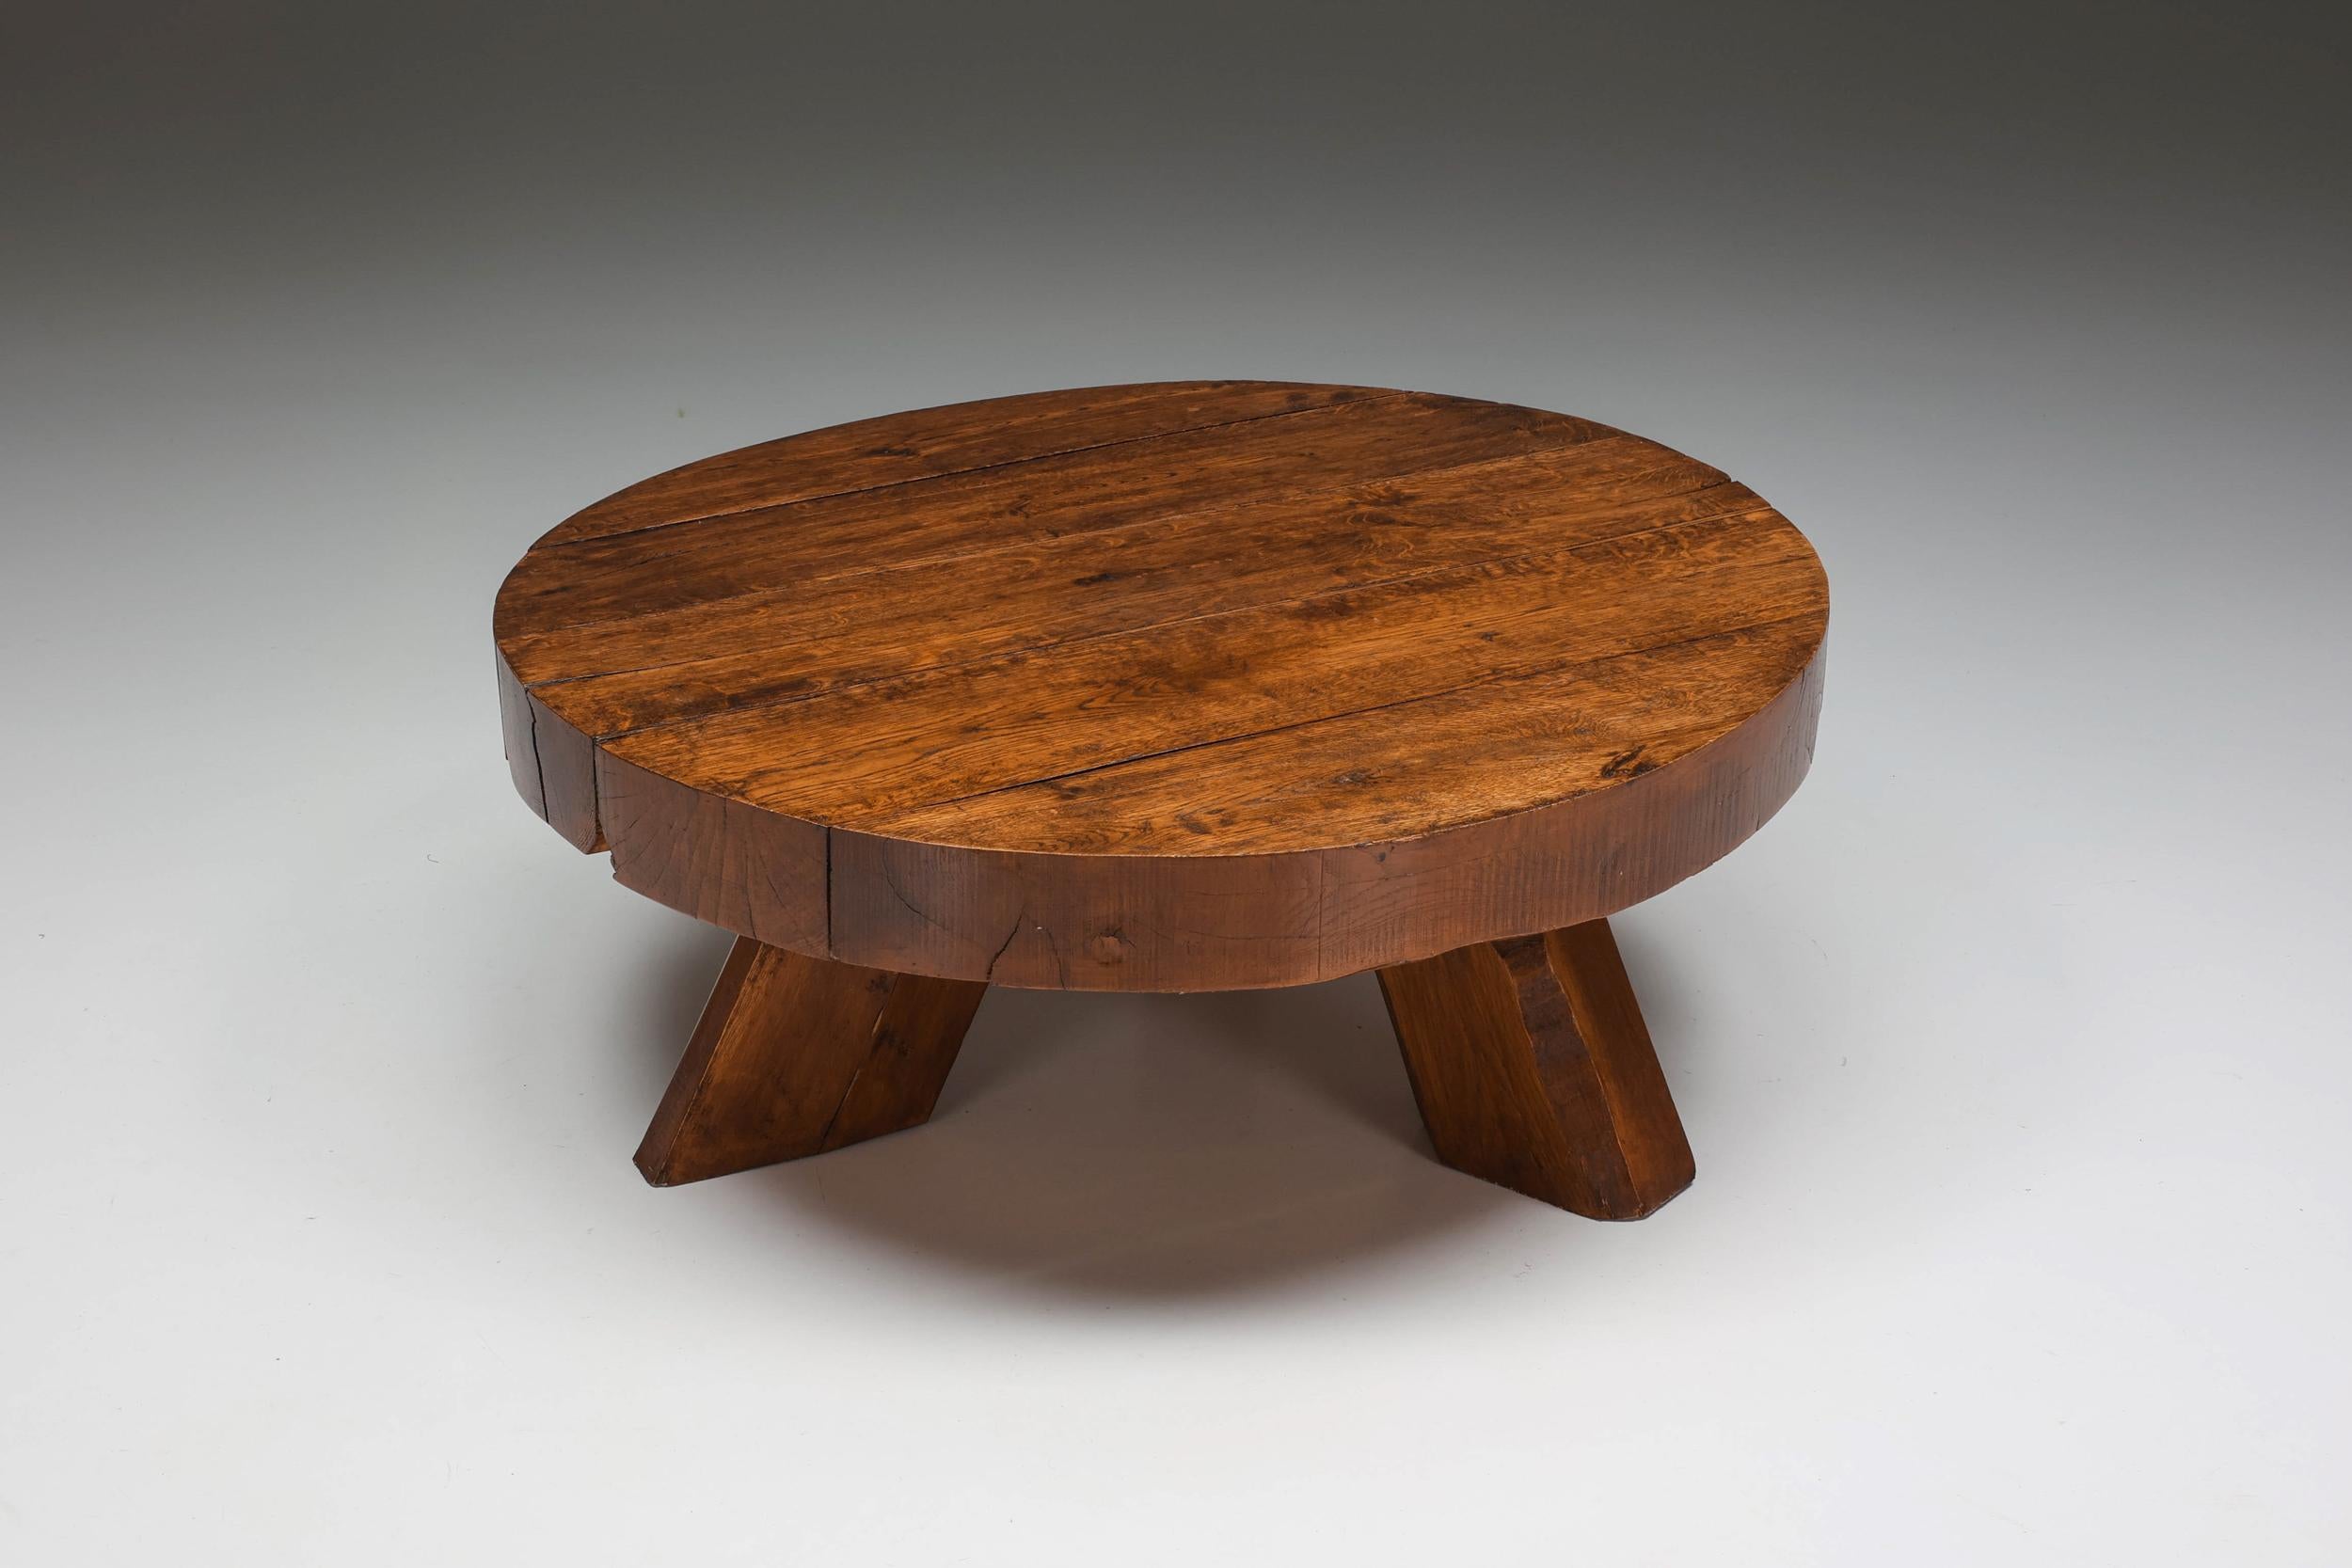 French Wab-Sabi Wooden Round Coffee Table, Mid-Century Modern, Rustic, 1950's